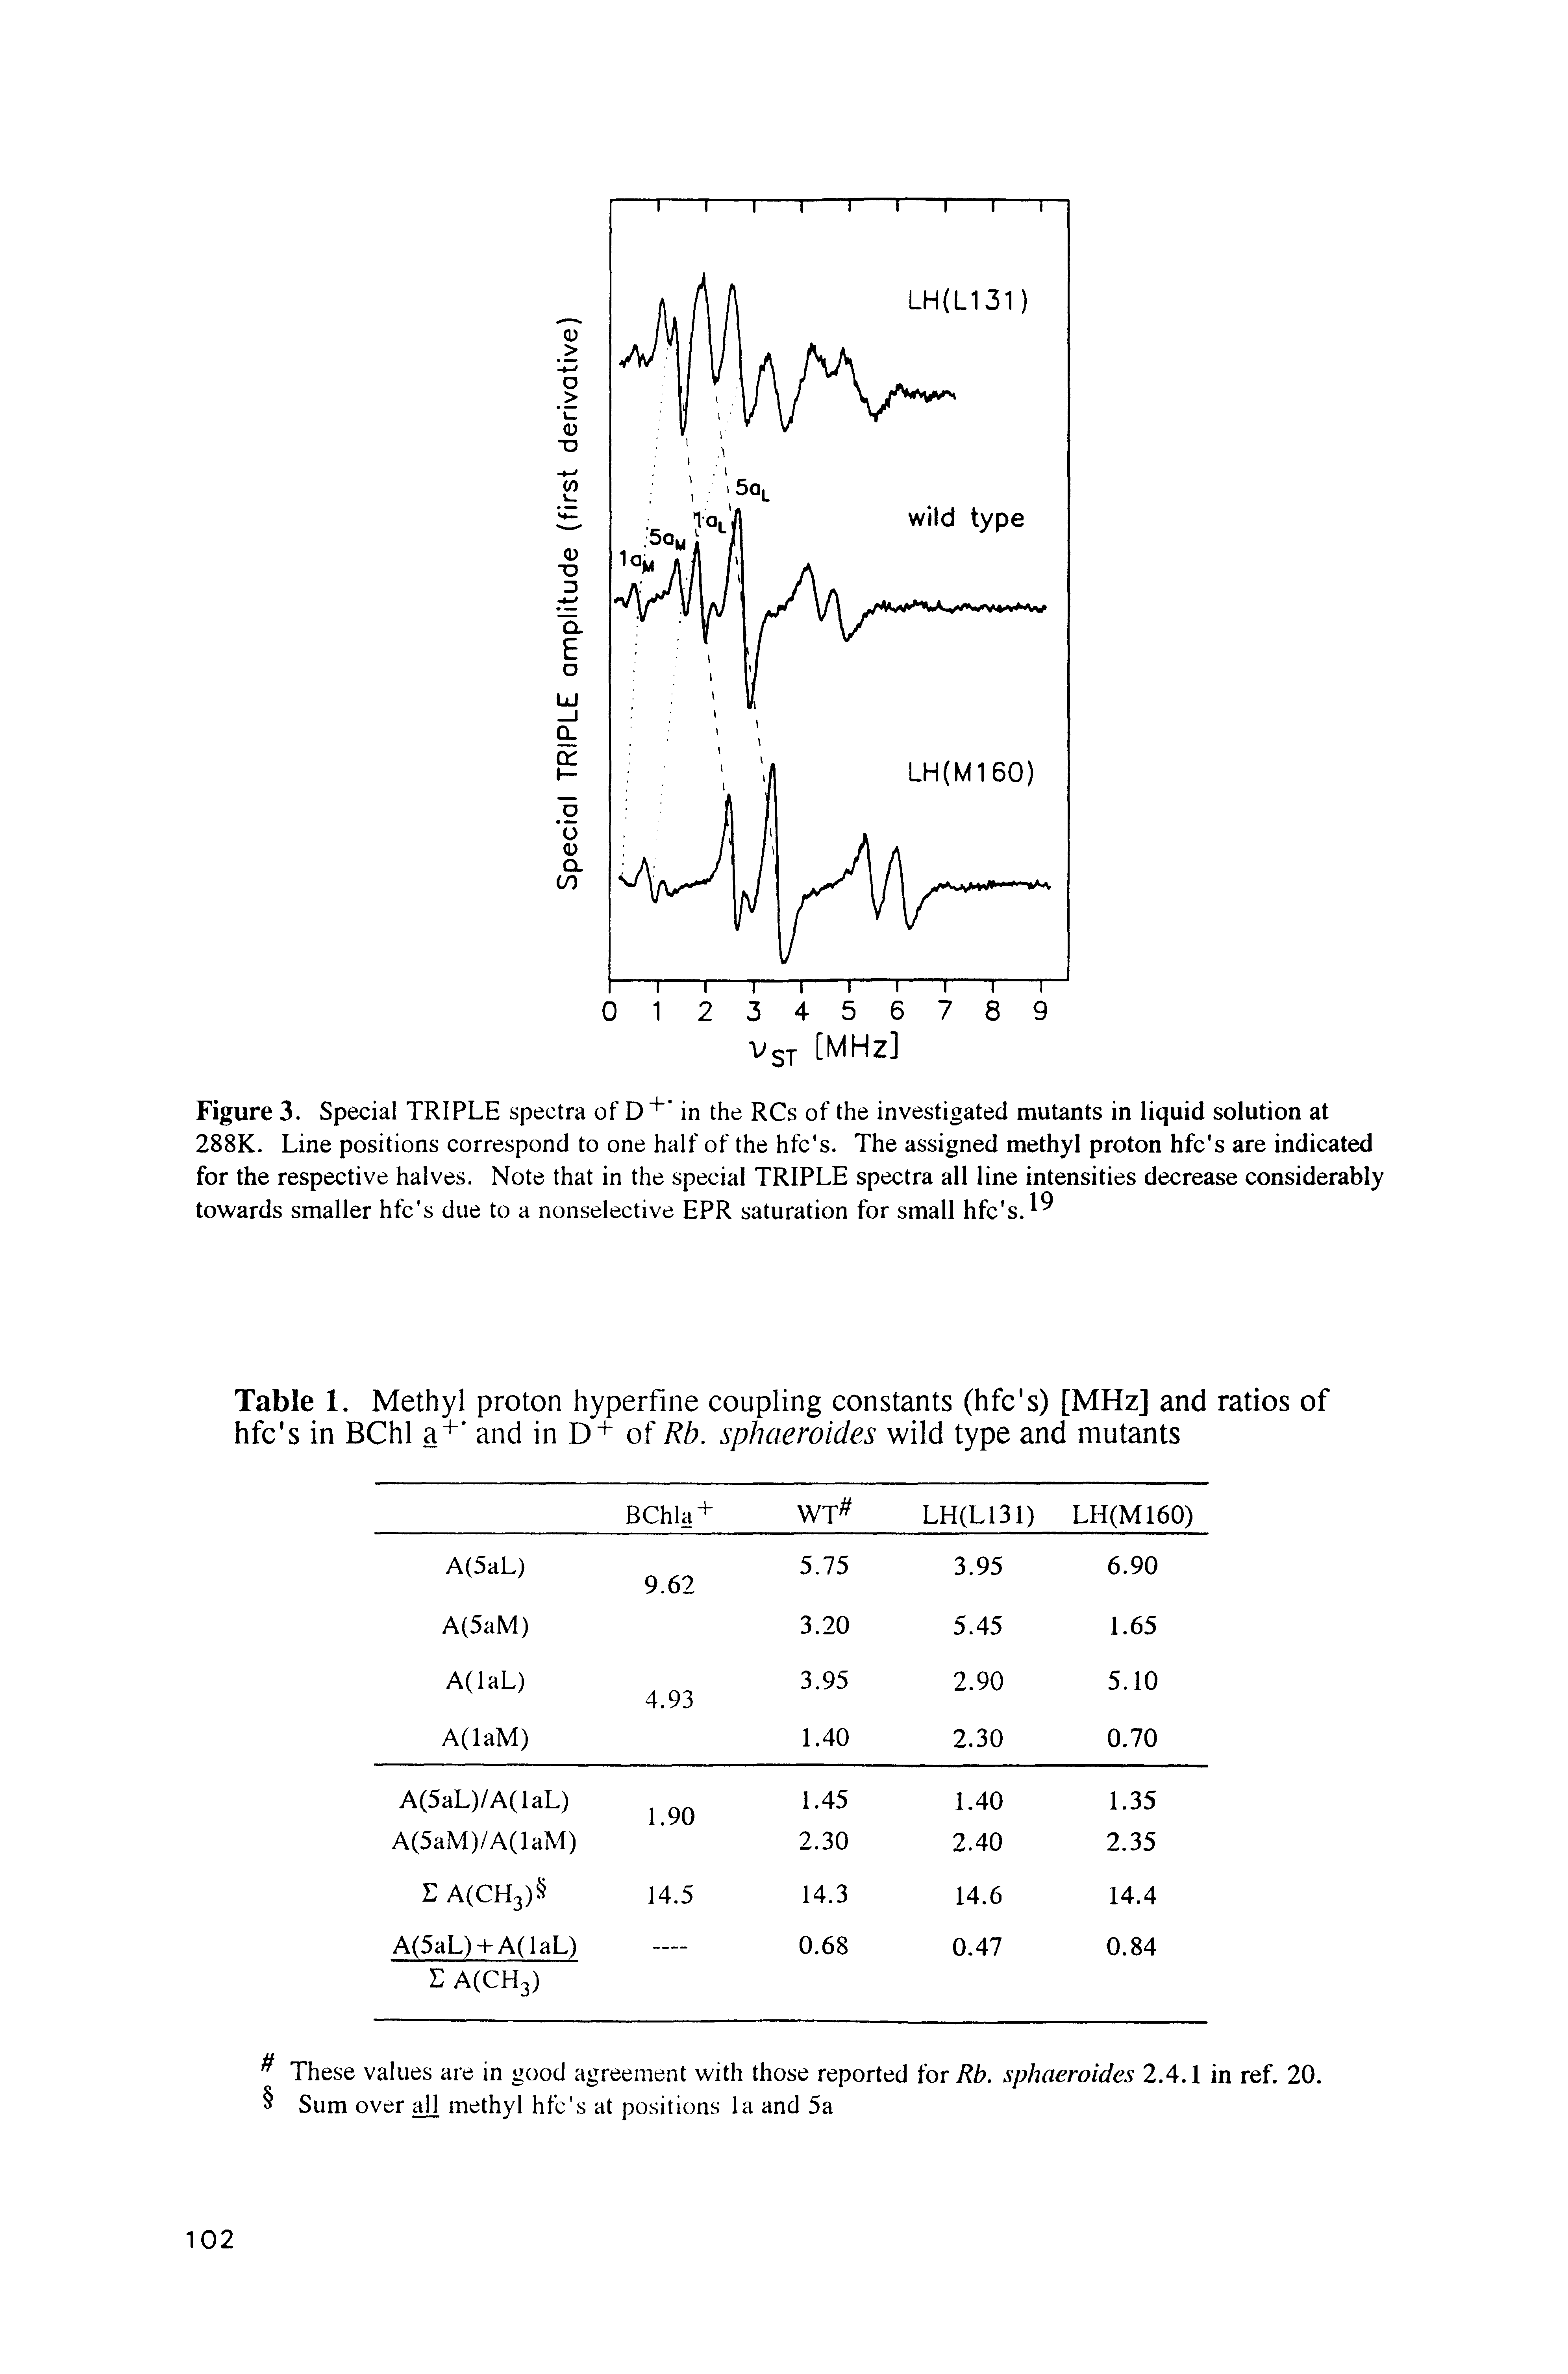 Table 1. Methyl proton hyperfine coupling constants (hfc s) [MHz] and ratios of hfc s in BChl a and in D+ of Rb. sphaewides wild type and mutants...